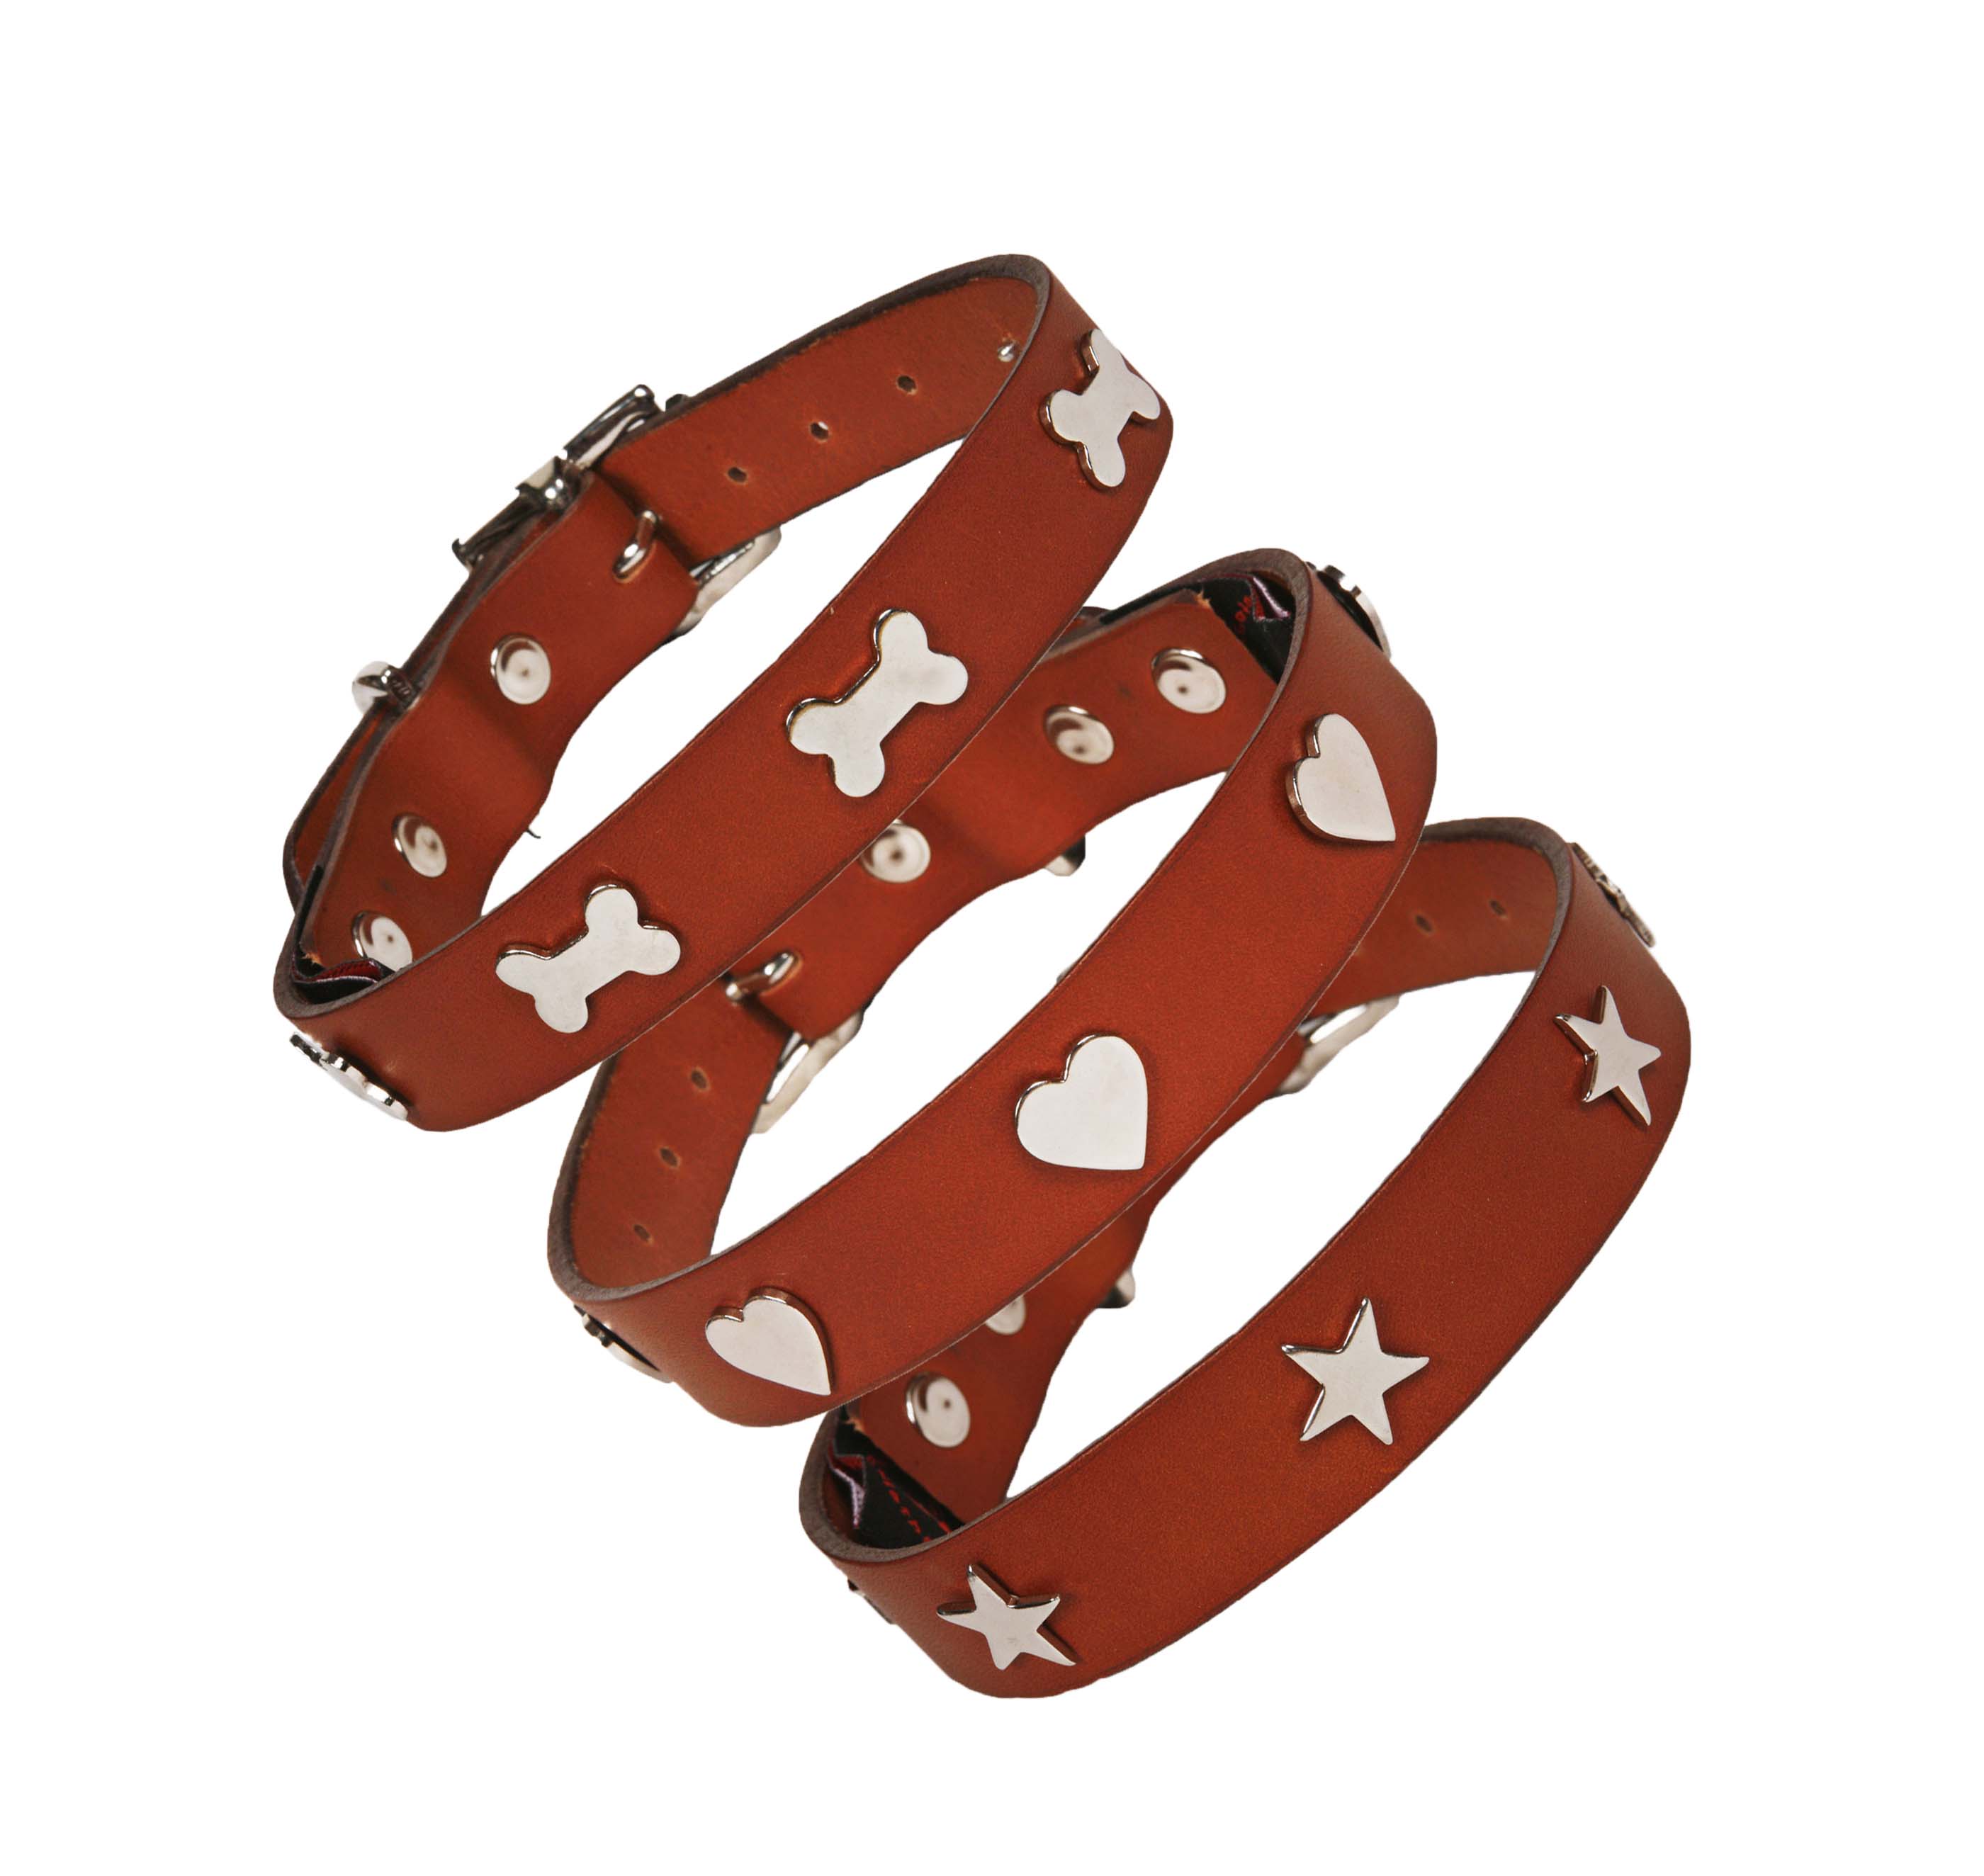 Creature Clothes Tan Leather Dog Collar With Silver Studs